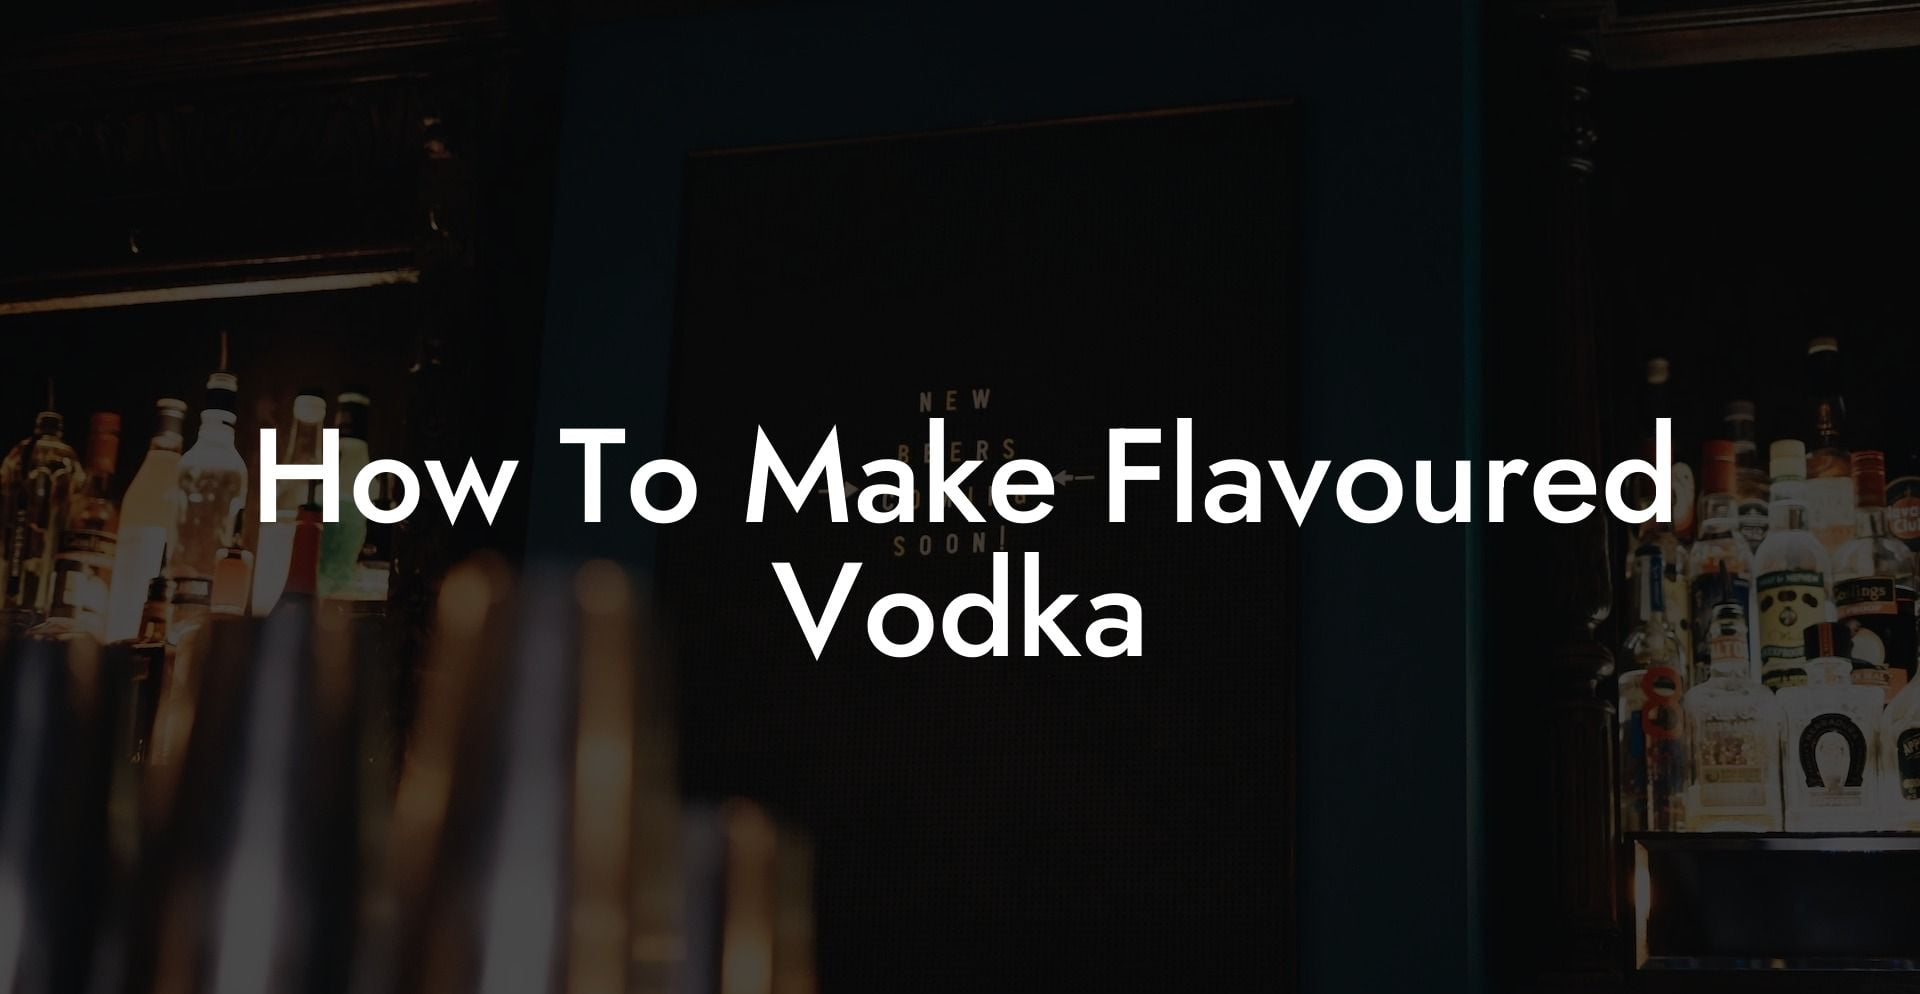 How To Make Flavoured Vodka